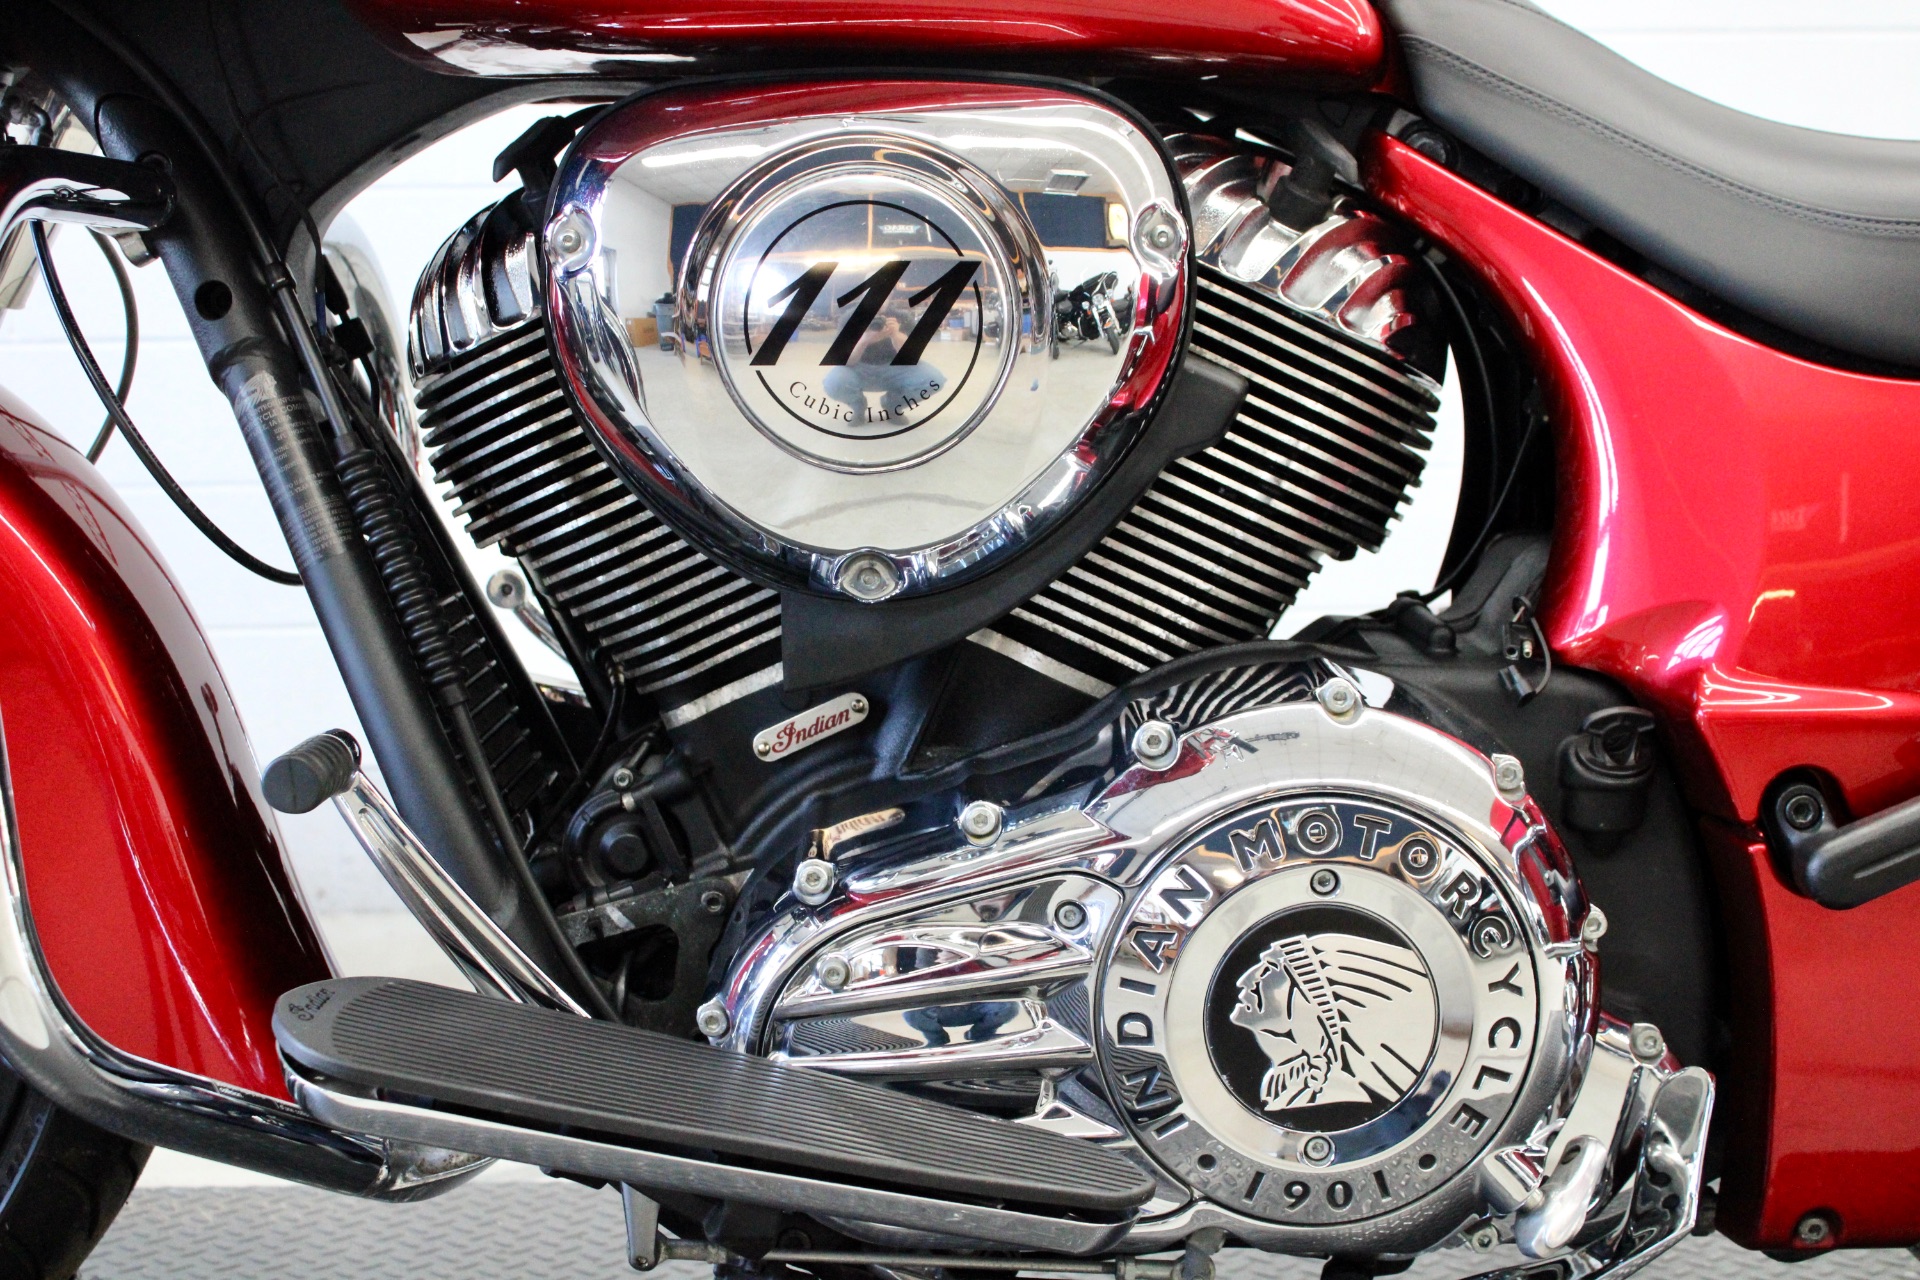 2019 Indian Motorcycle Chieftain® Limited ABS in Fredericksburg, Virginia - Photo 19